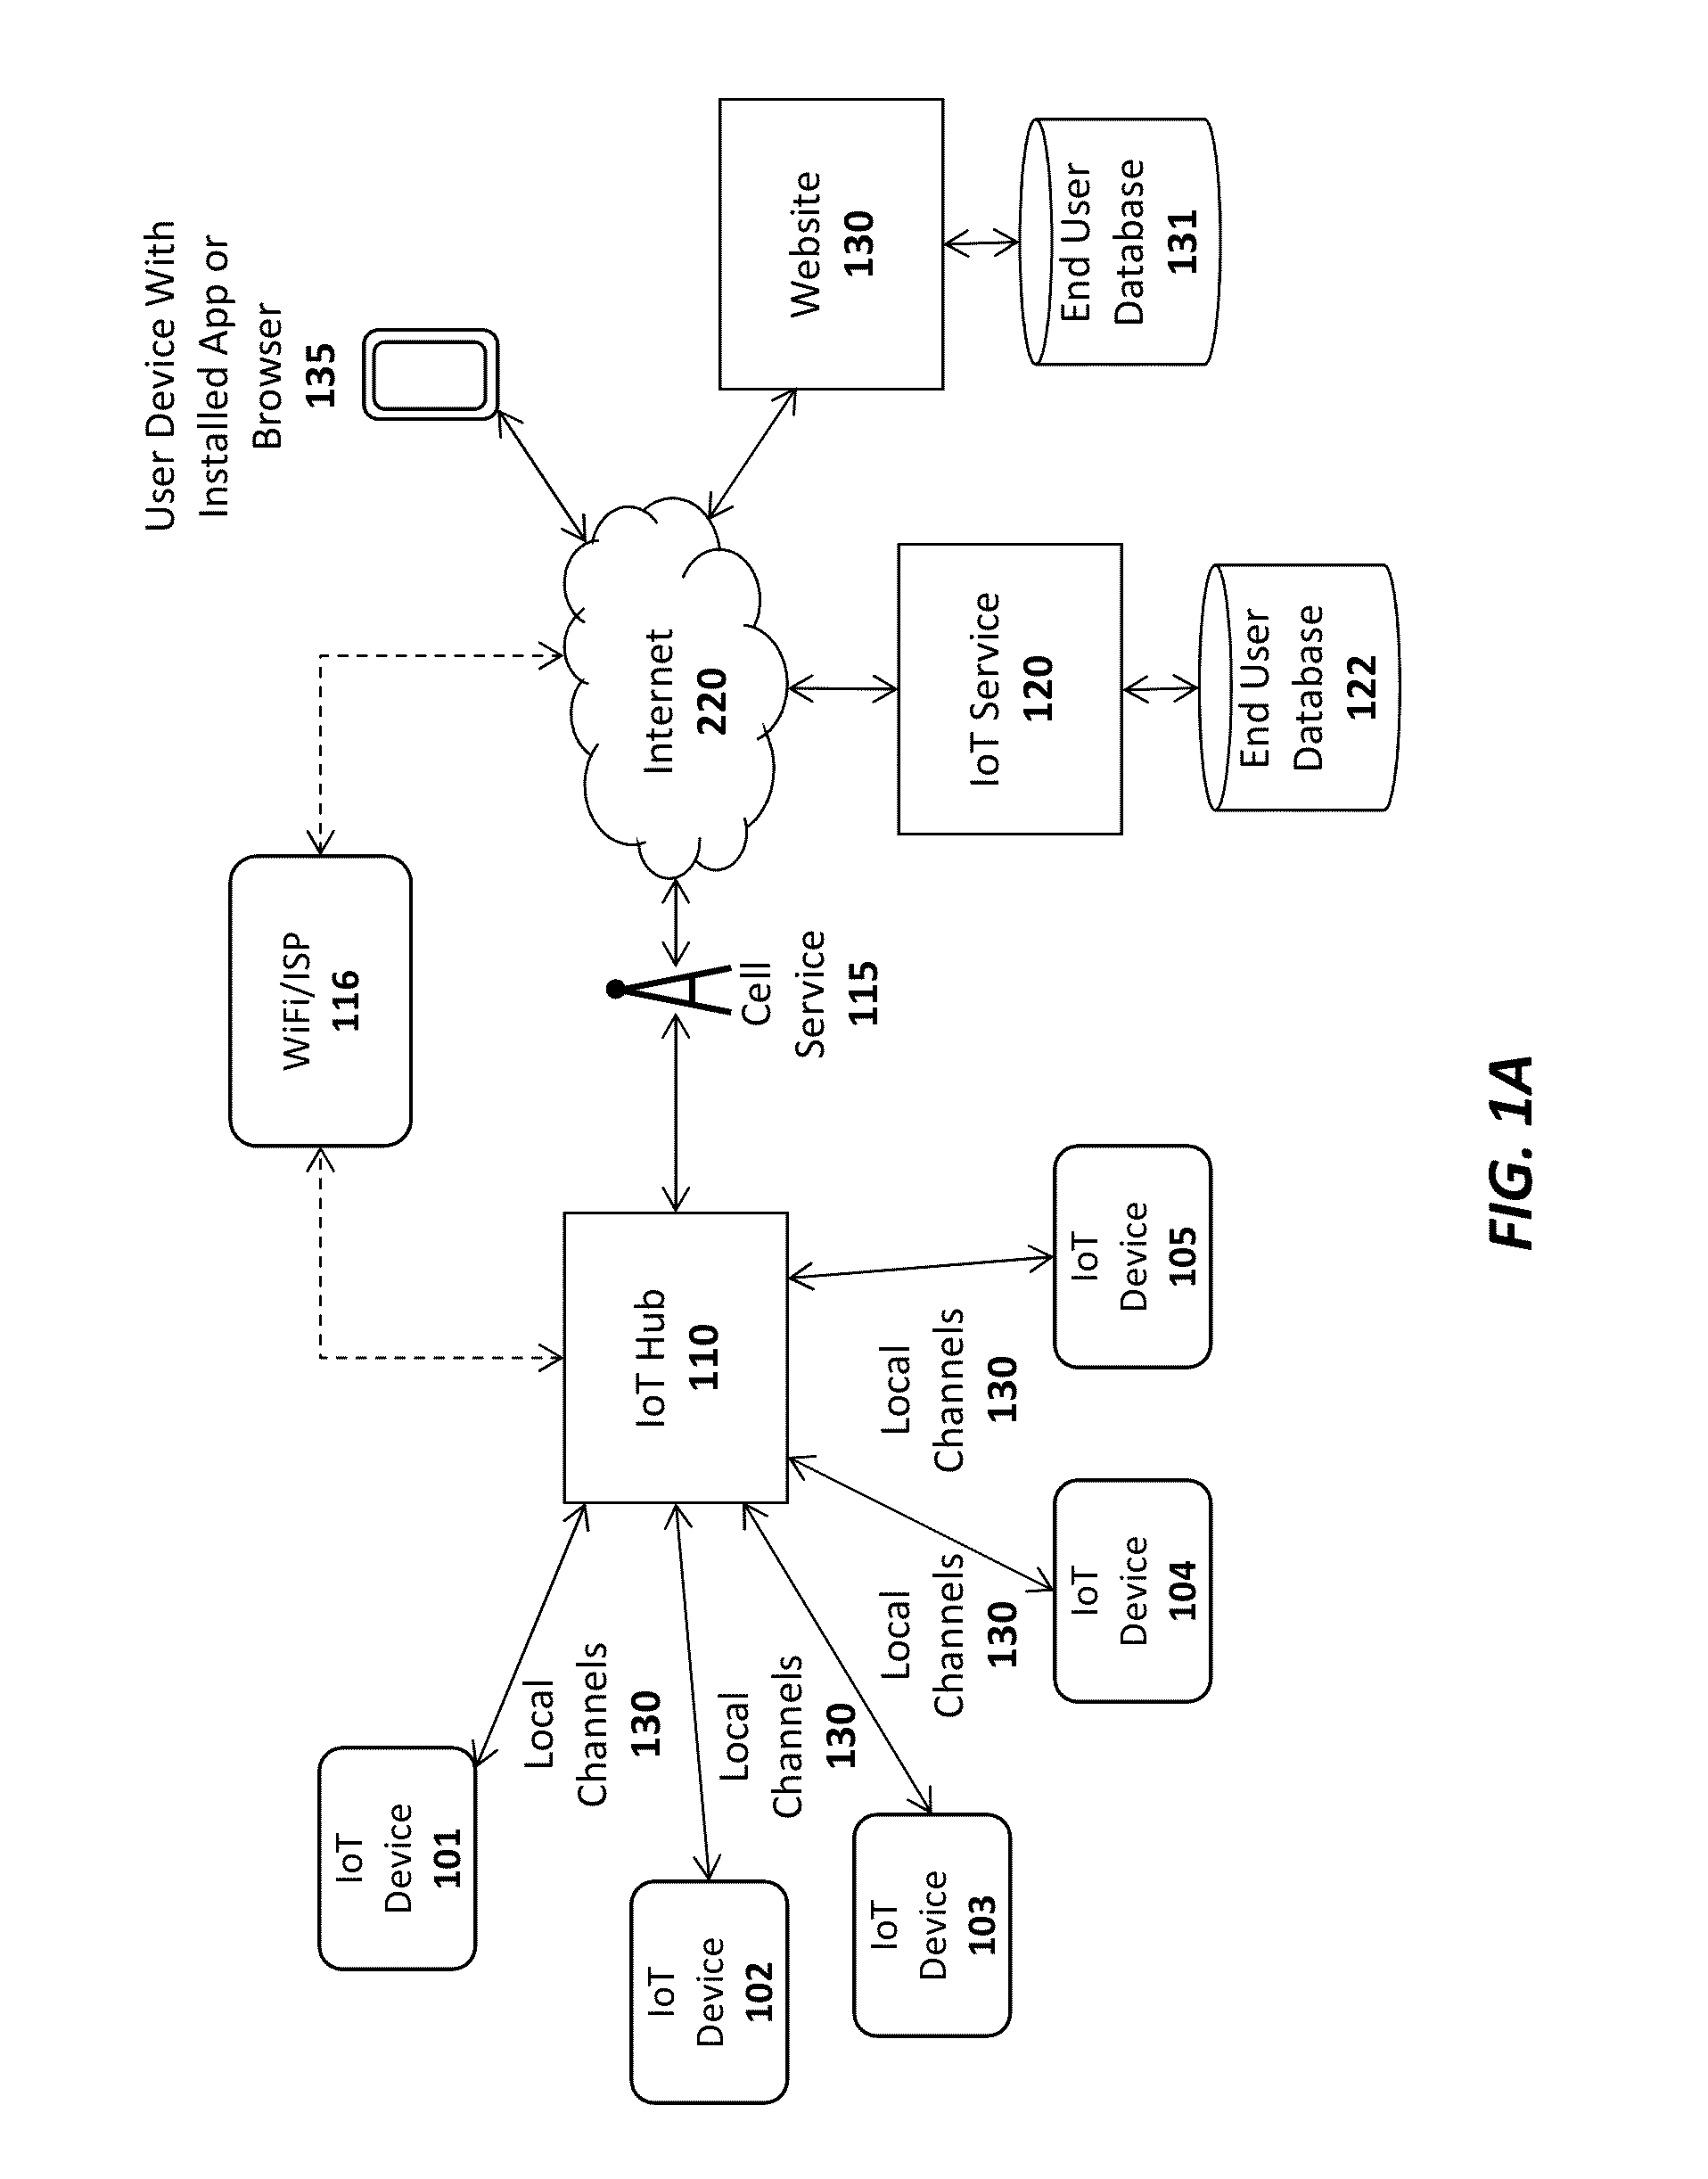 System and method for collecting and utilizing user behavior data within an IoT system